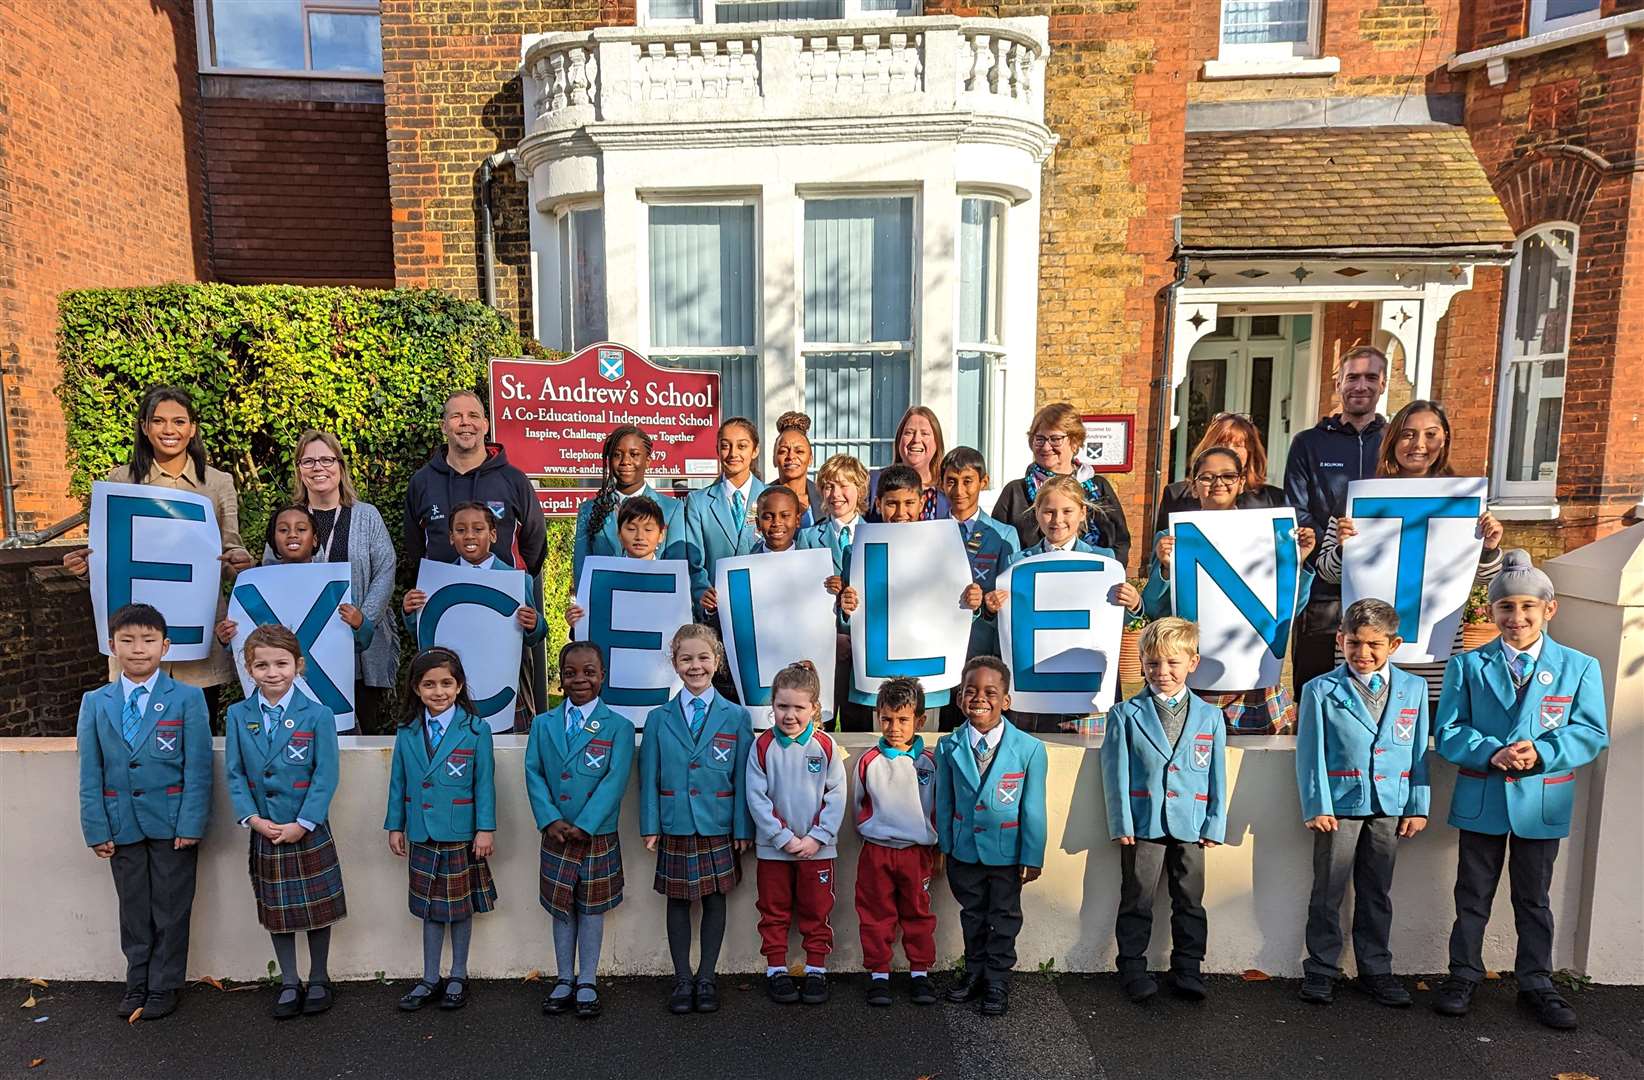 Pupils and staff at St. Andrew's School, in Rochester, have been awarded 'excellent' following an inspection last month. Picture: St. Andrew's School